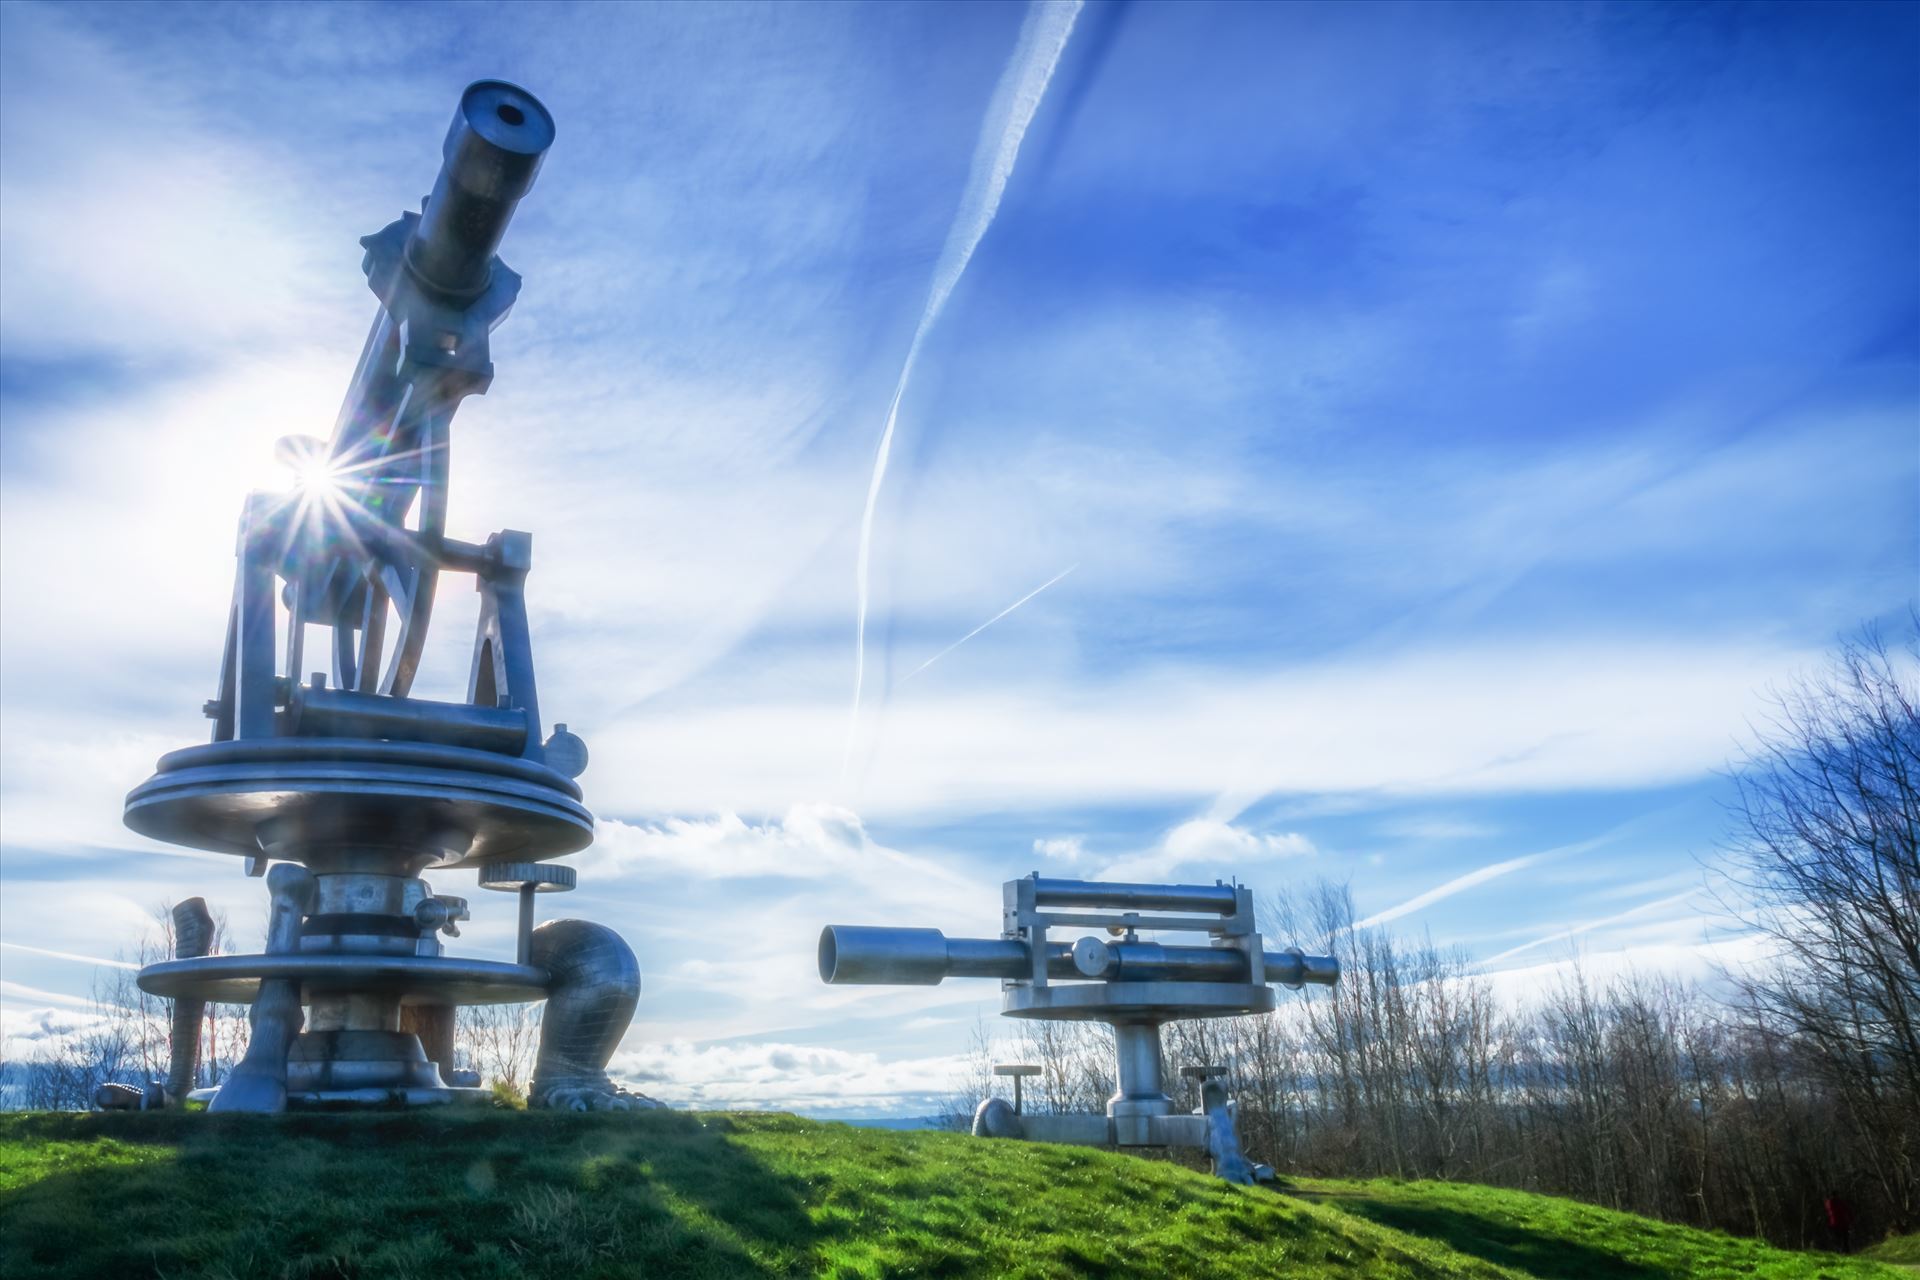 Terris Novalis - Situated on the coast to coast cycle route, the amazing stainless steel sculptures by Turner Prize winning artist Tony Cragg dominate the landscape above the old Consett Steelworks site. by philreay